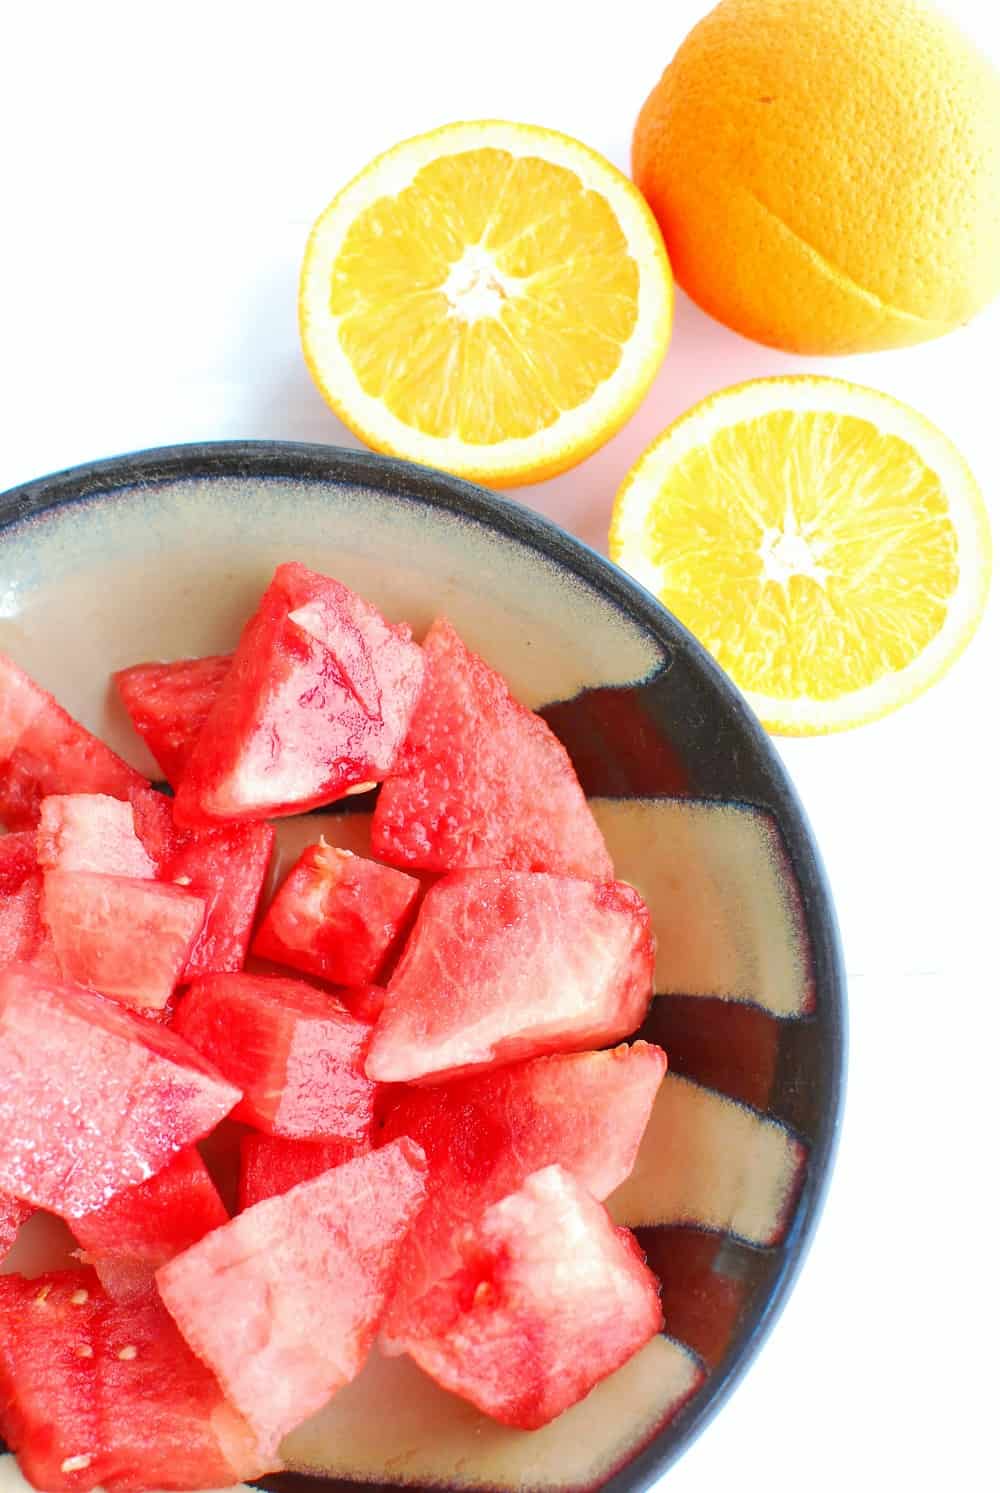 chopped watermelon in a bowl next to some sliced oranges